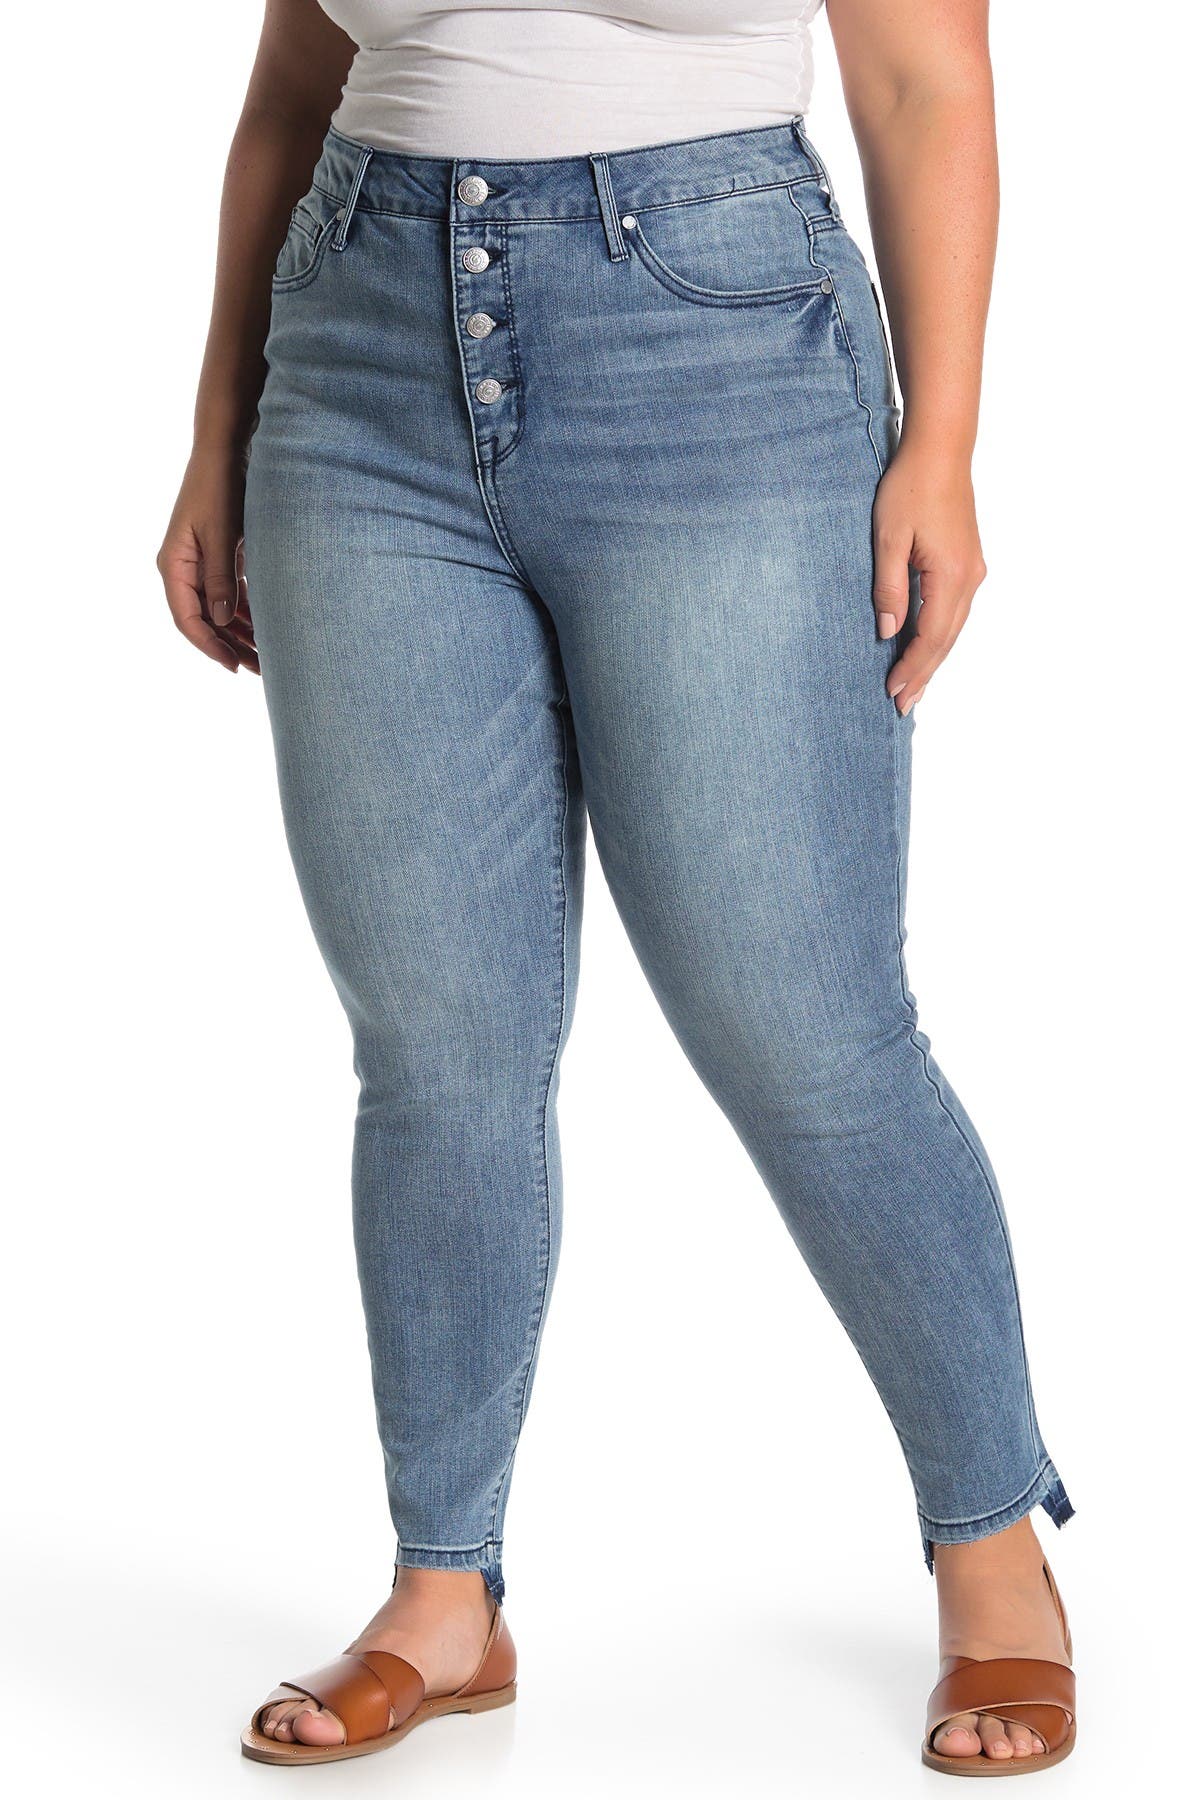 ultra high waisted jeans plus size